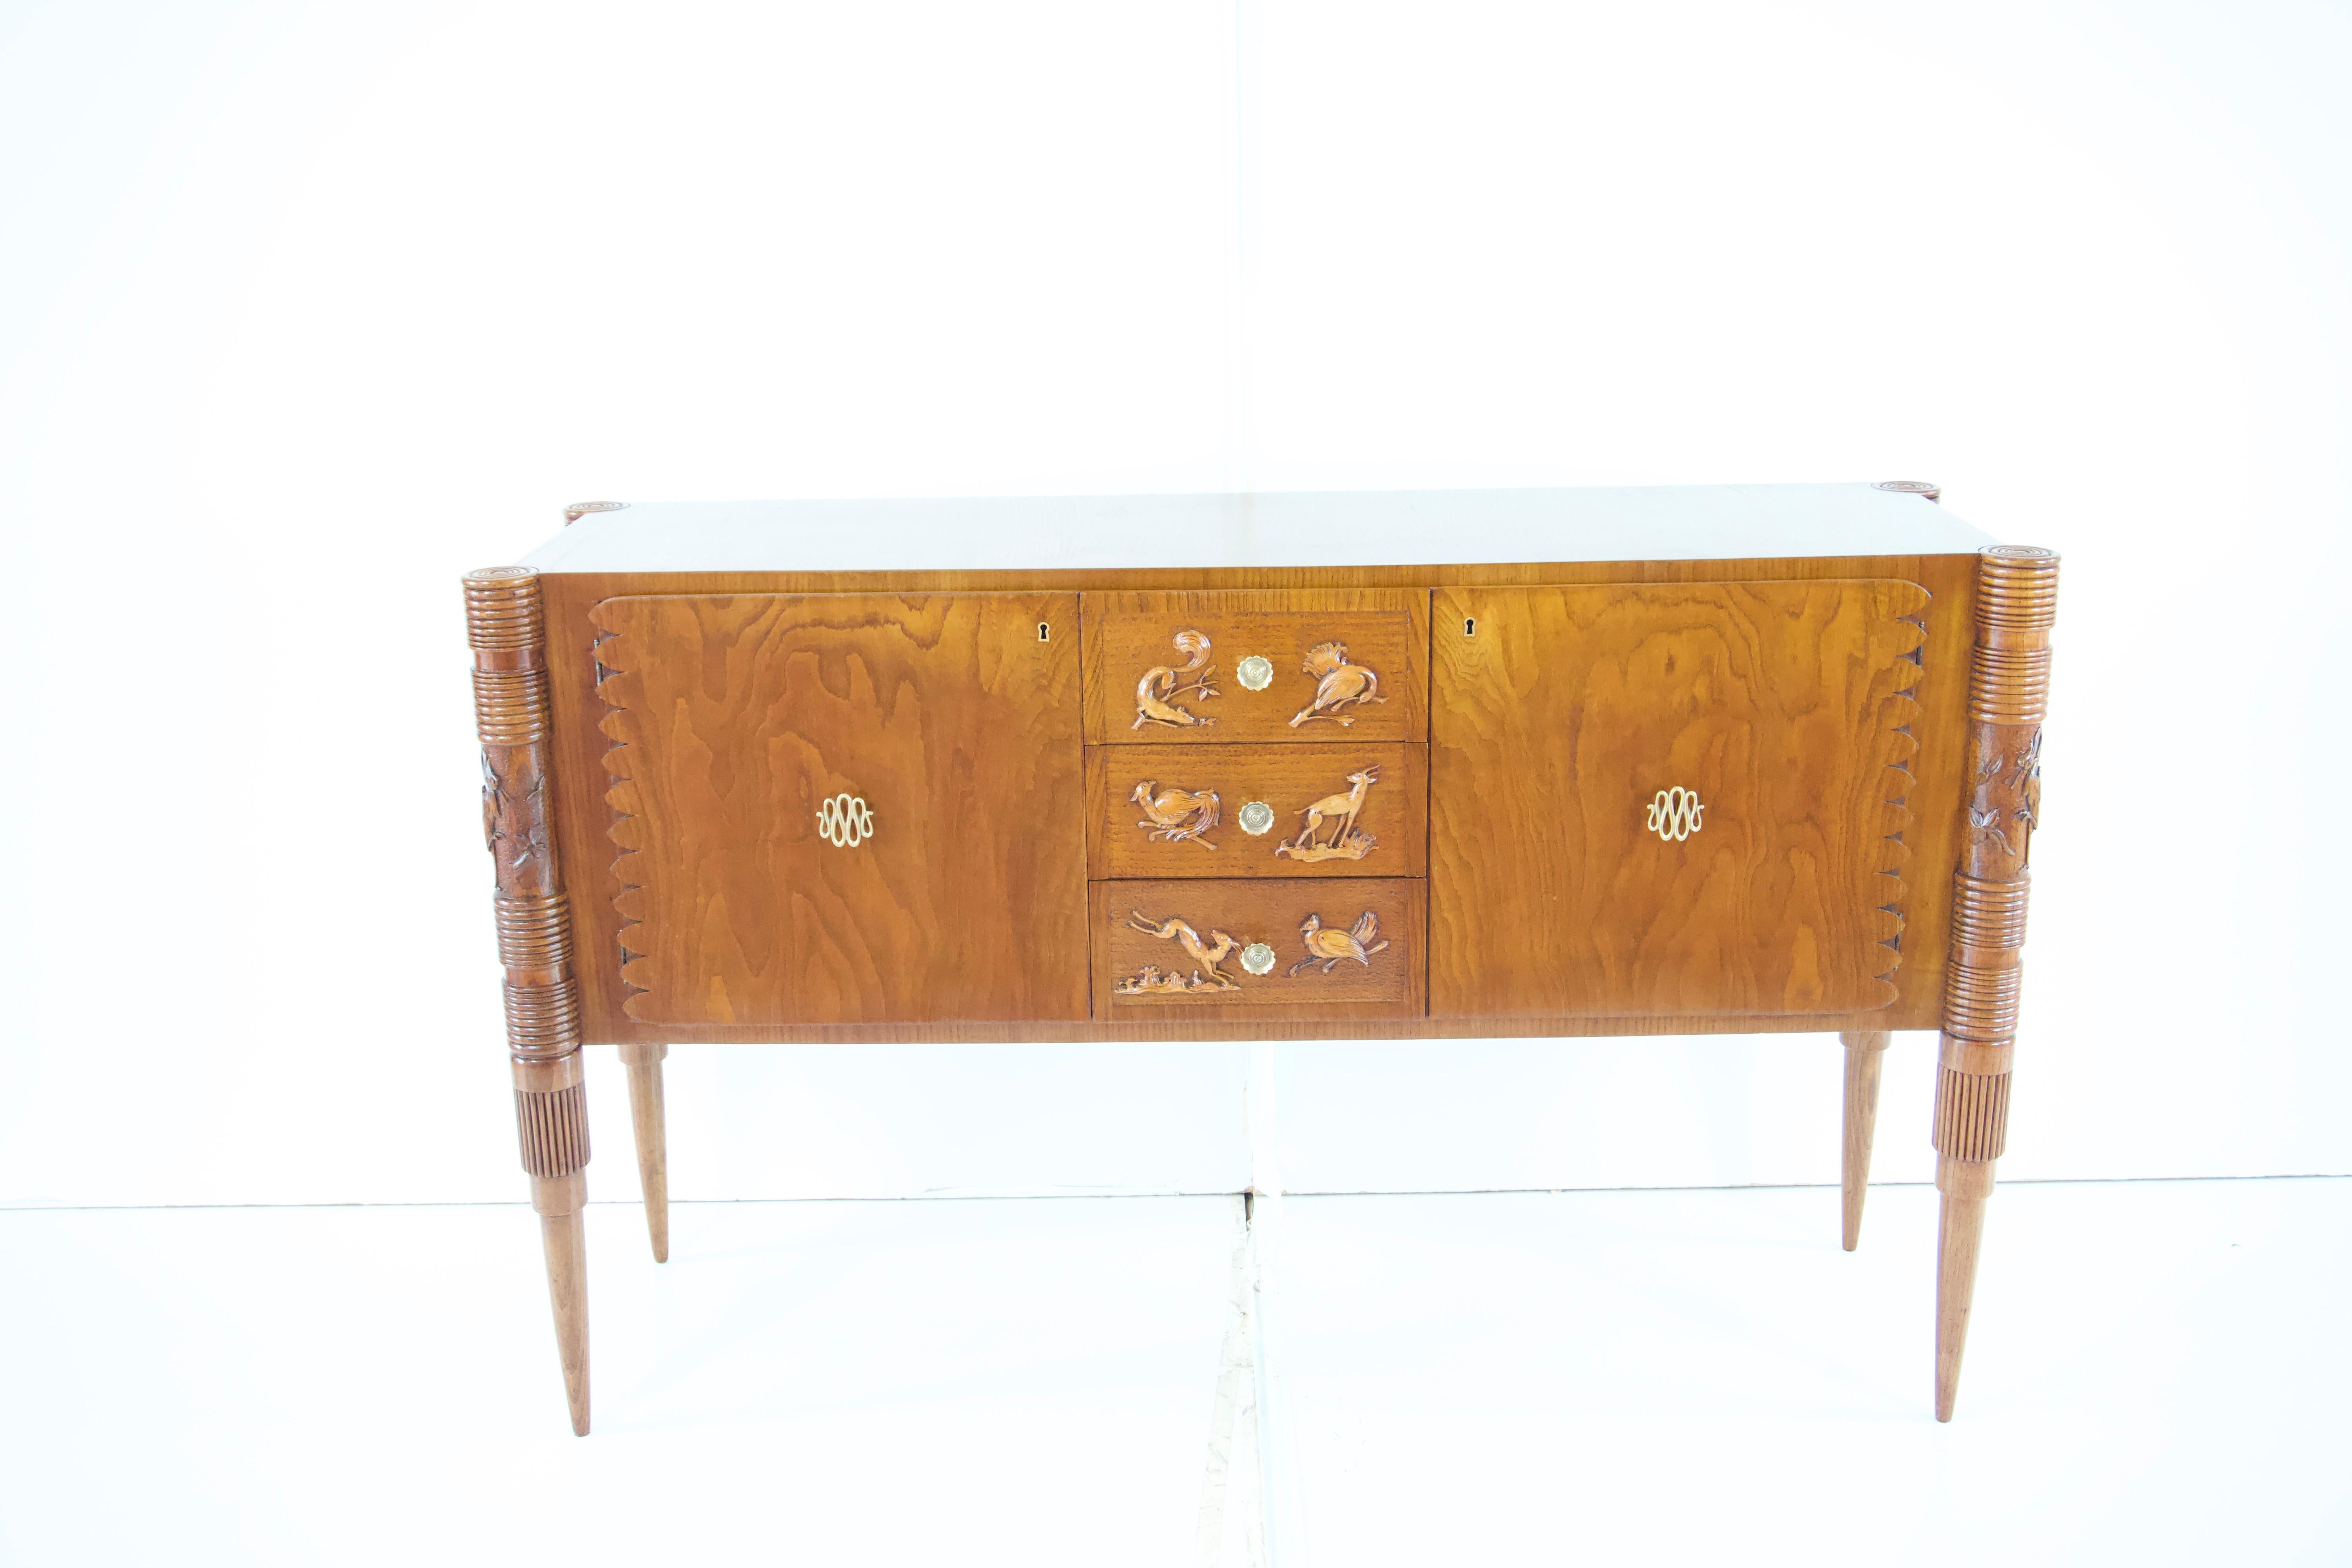  sideboard with a burled birch veneer designed by Pier Luigi Colli in 1940
produced by F.lli Marelli Cantu
two exterior cabinet doors with ribbon design brass door pulls and a scalloped carved edge, centering three drawers with carved bird